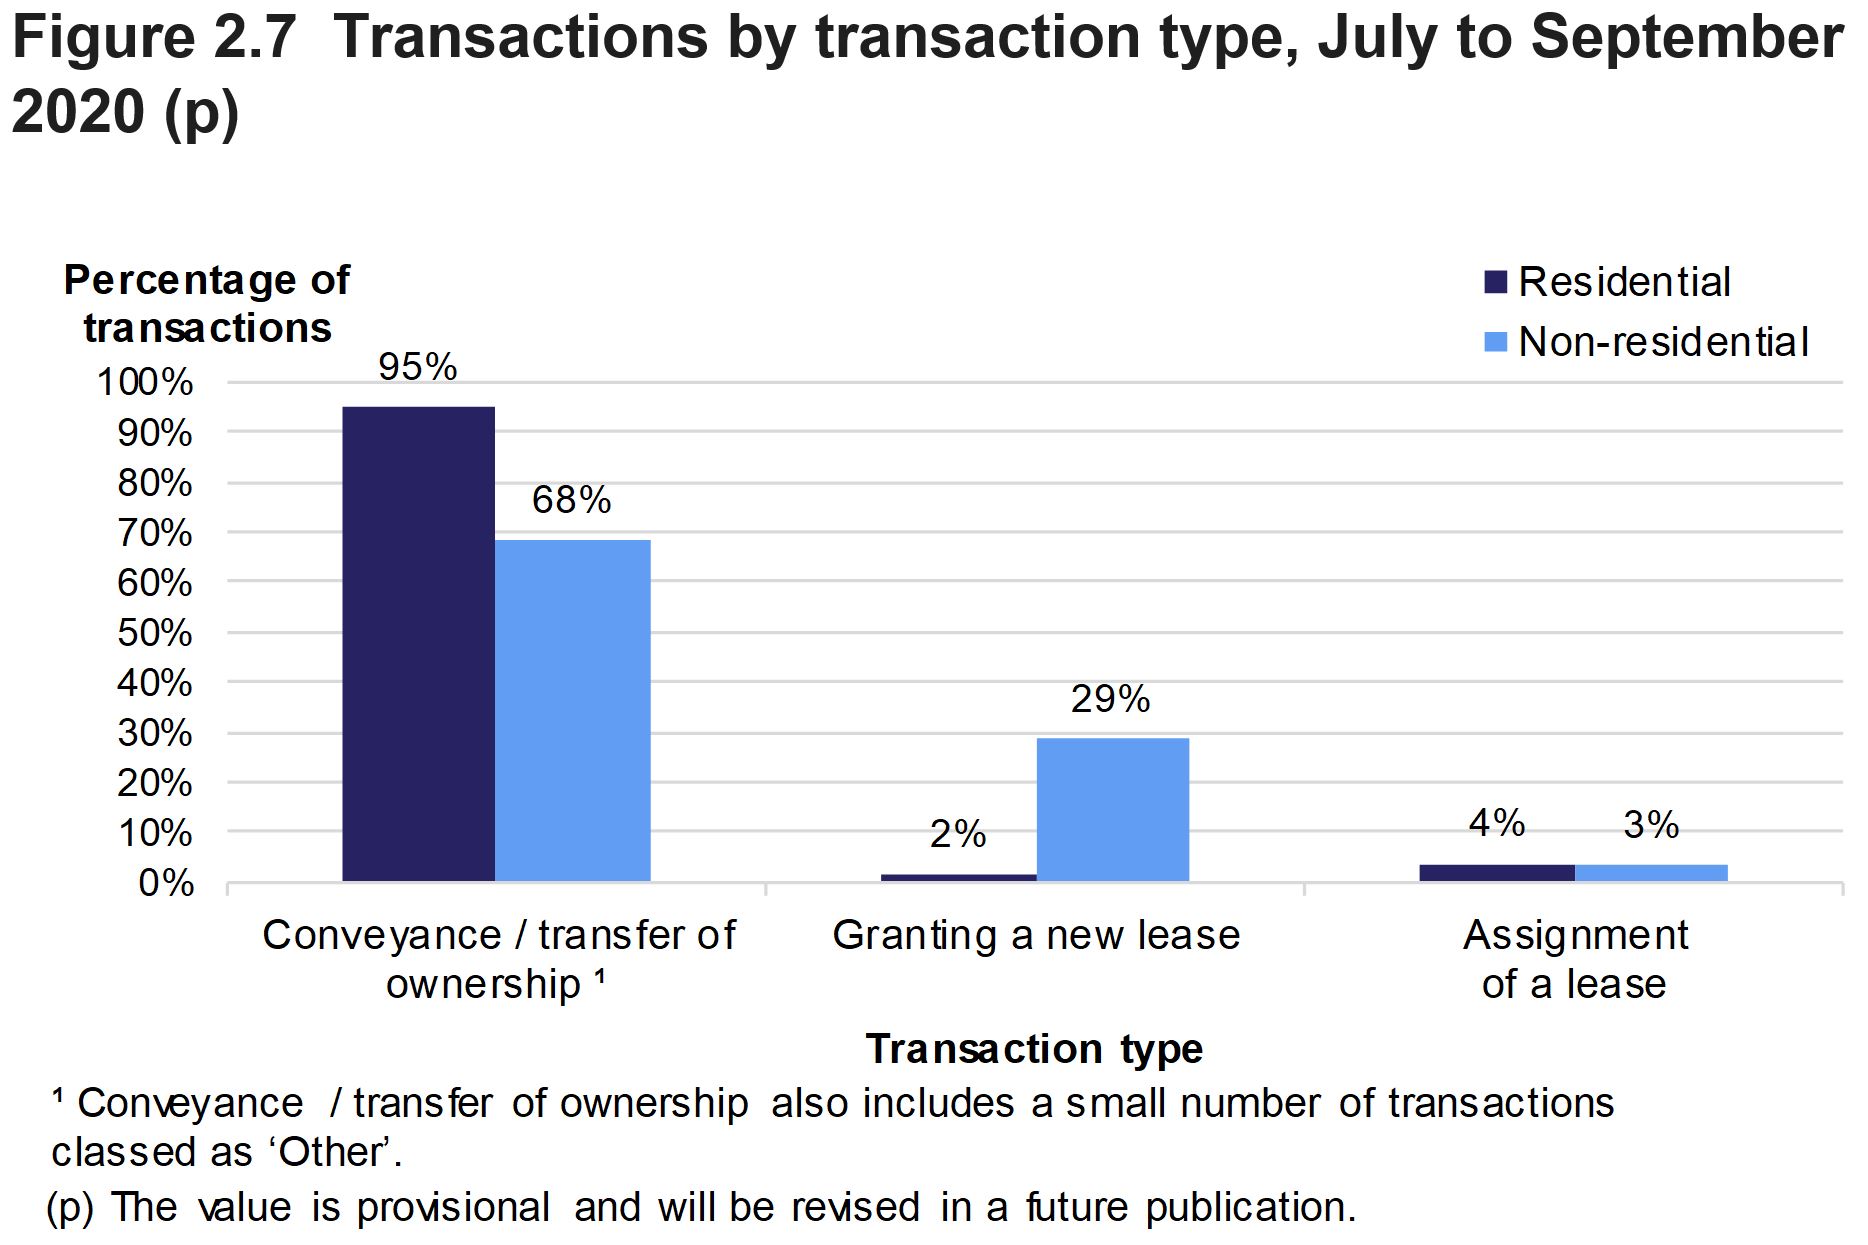 Figure 2.7 shows the percentage of transactions involving conveyance / transfer of ownership, granting of a new lease or assignment of a lease, for July to September 2020. Separate percentages are given for residential and non-residential transactions.